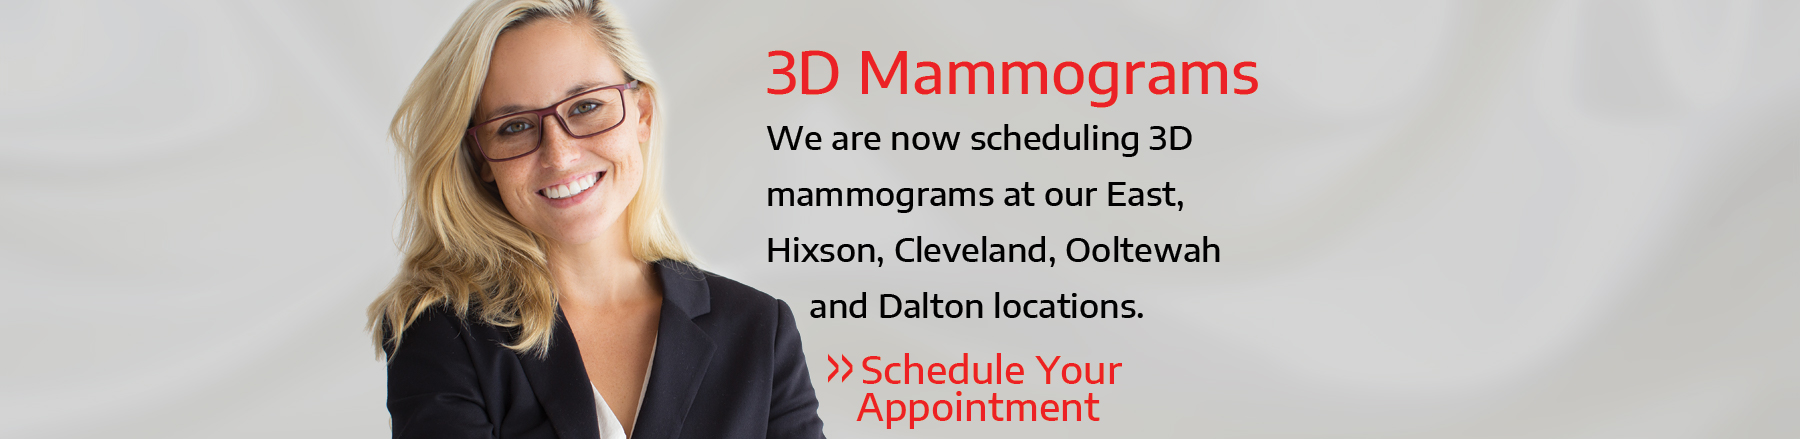 3D Mammograms available at our East, Hixson, Cleveland, Ooltewah and Dalton locations. Click to schedule your appointment